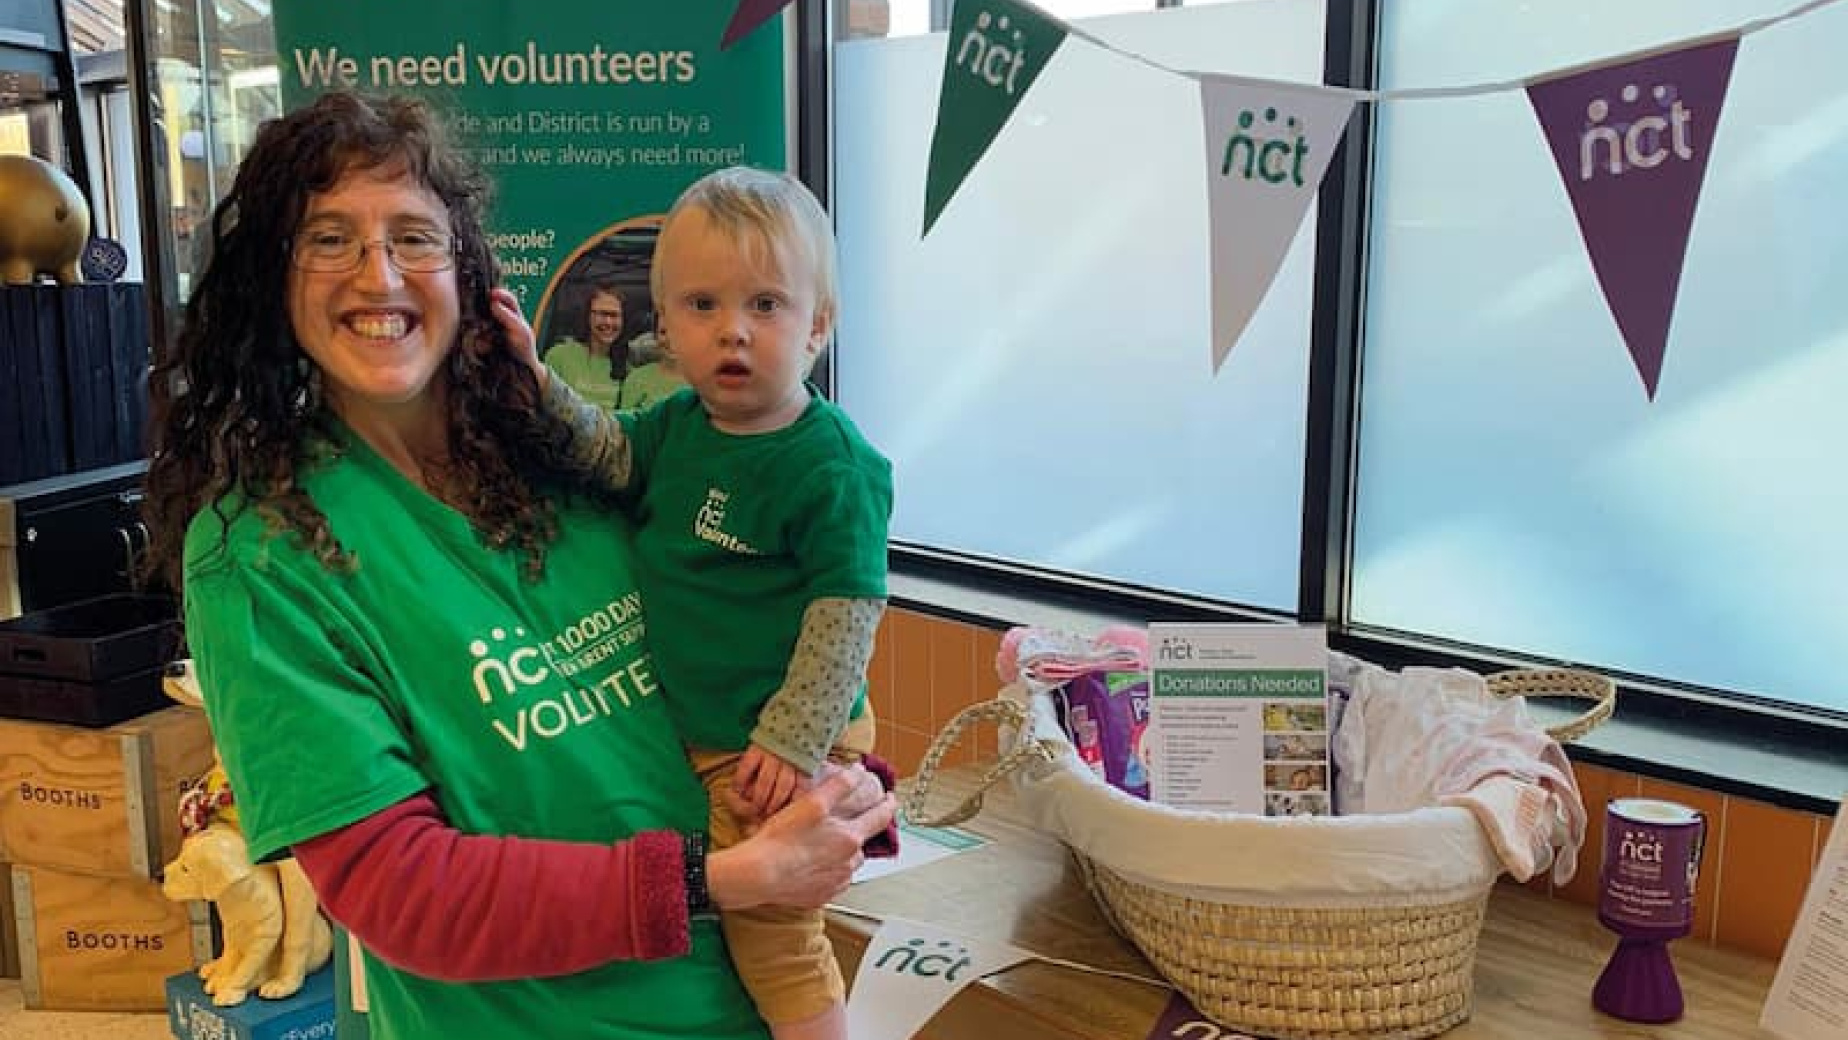 Volunteer with their child at a NCT event